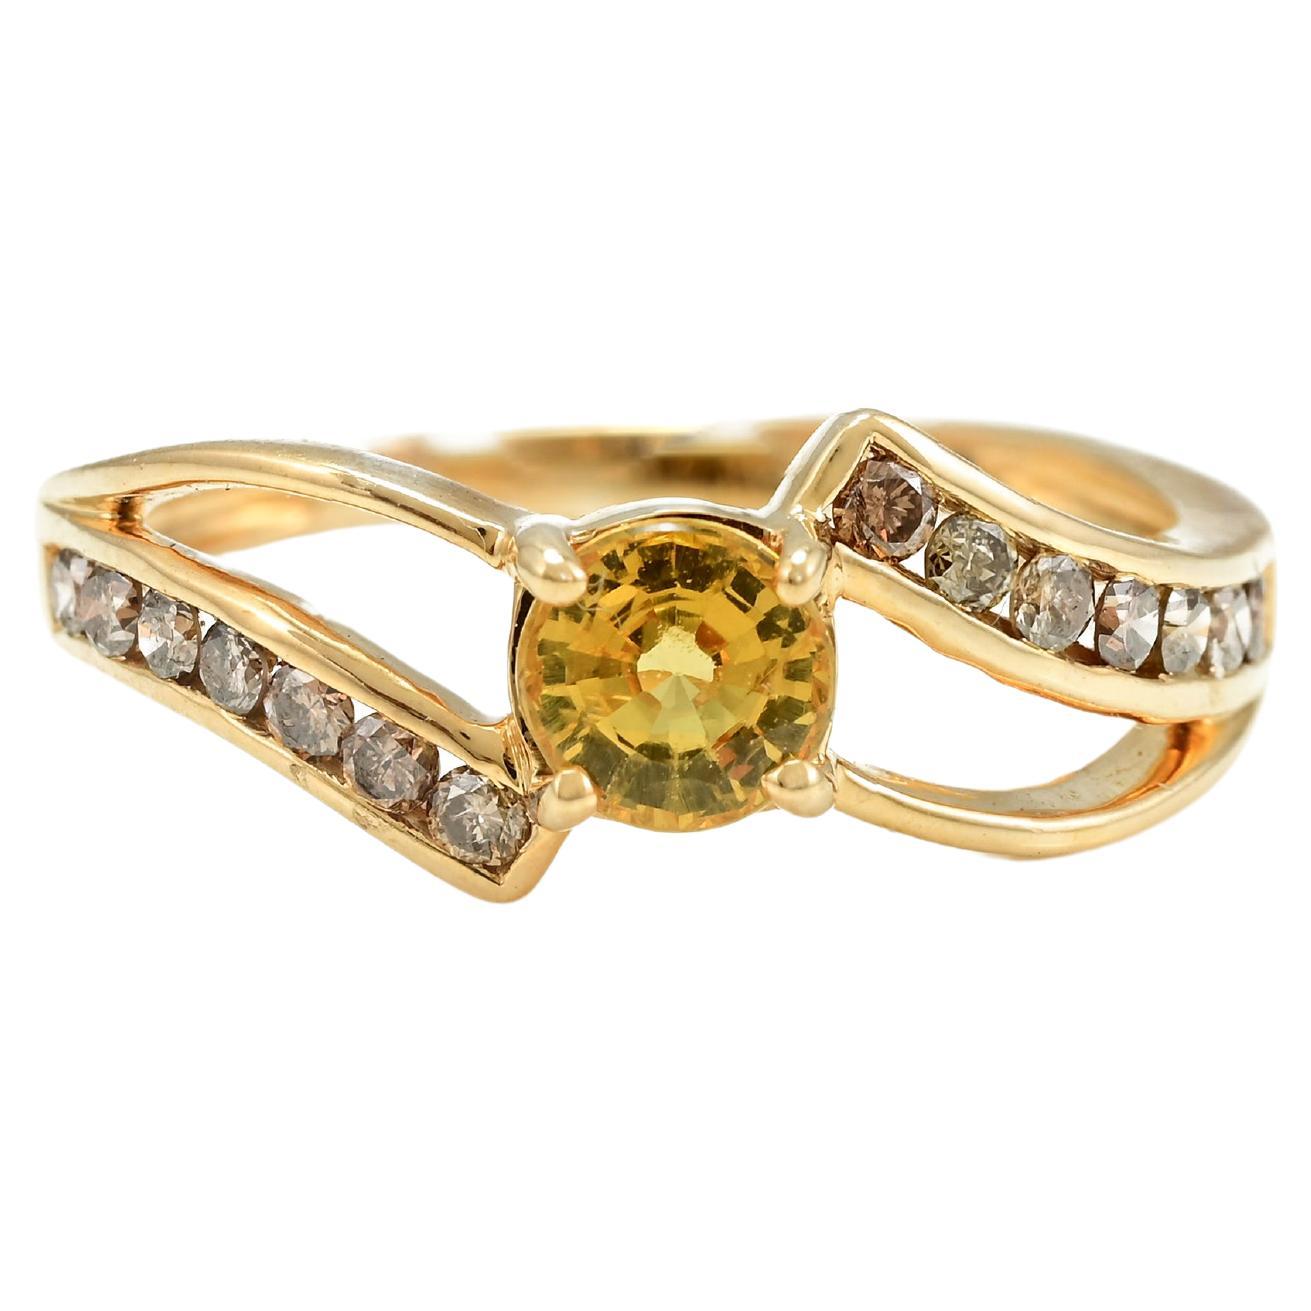 For Sale:  Certified Yellow Sapphire Ring with Diamonds in 18k Solid Yellow Gold